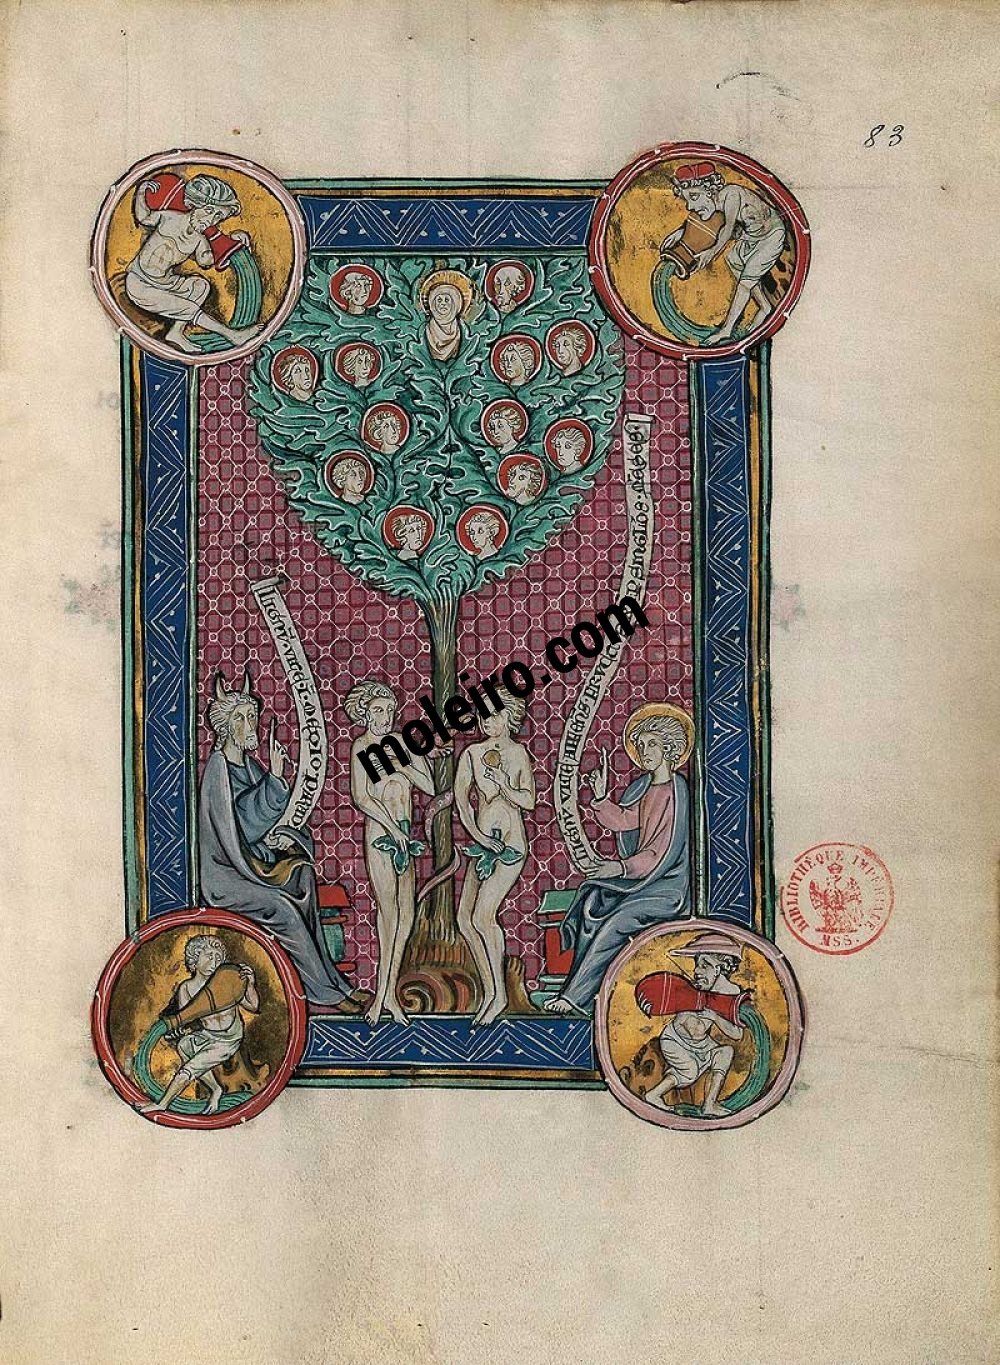 Folder of 5 prints from the Apocalypse of 1313 The Tree of Life, f. 83r